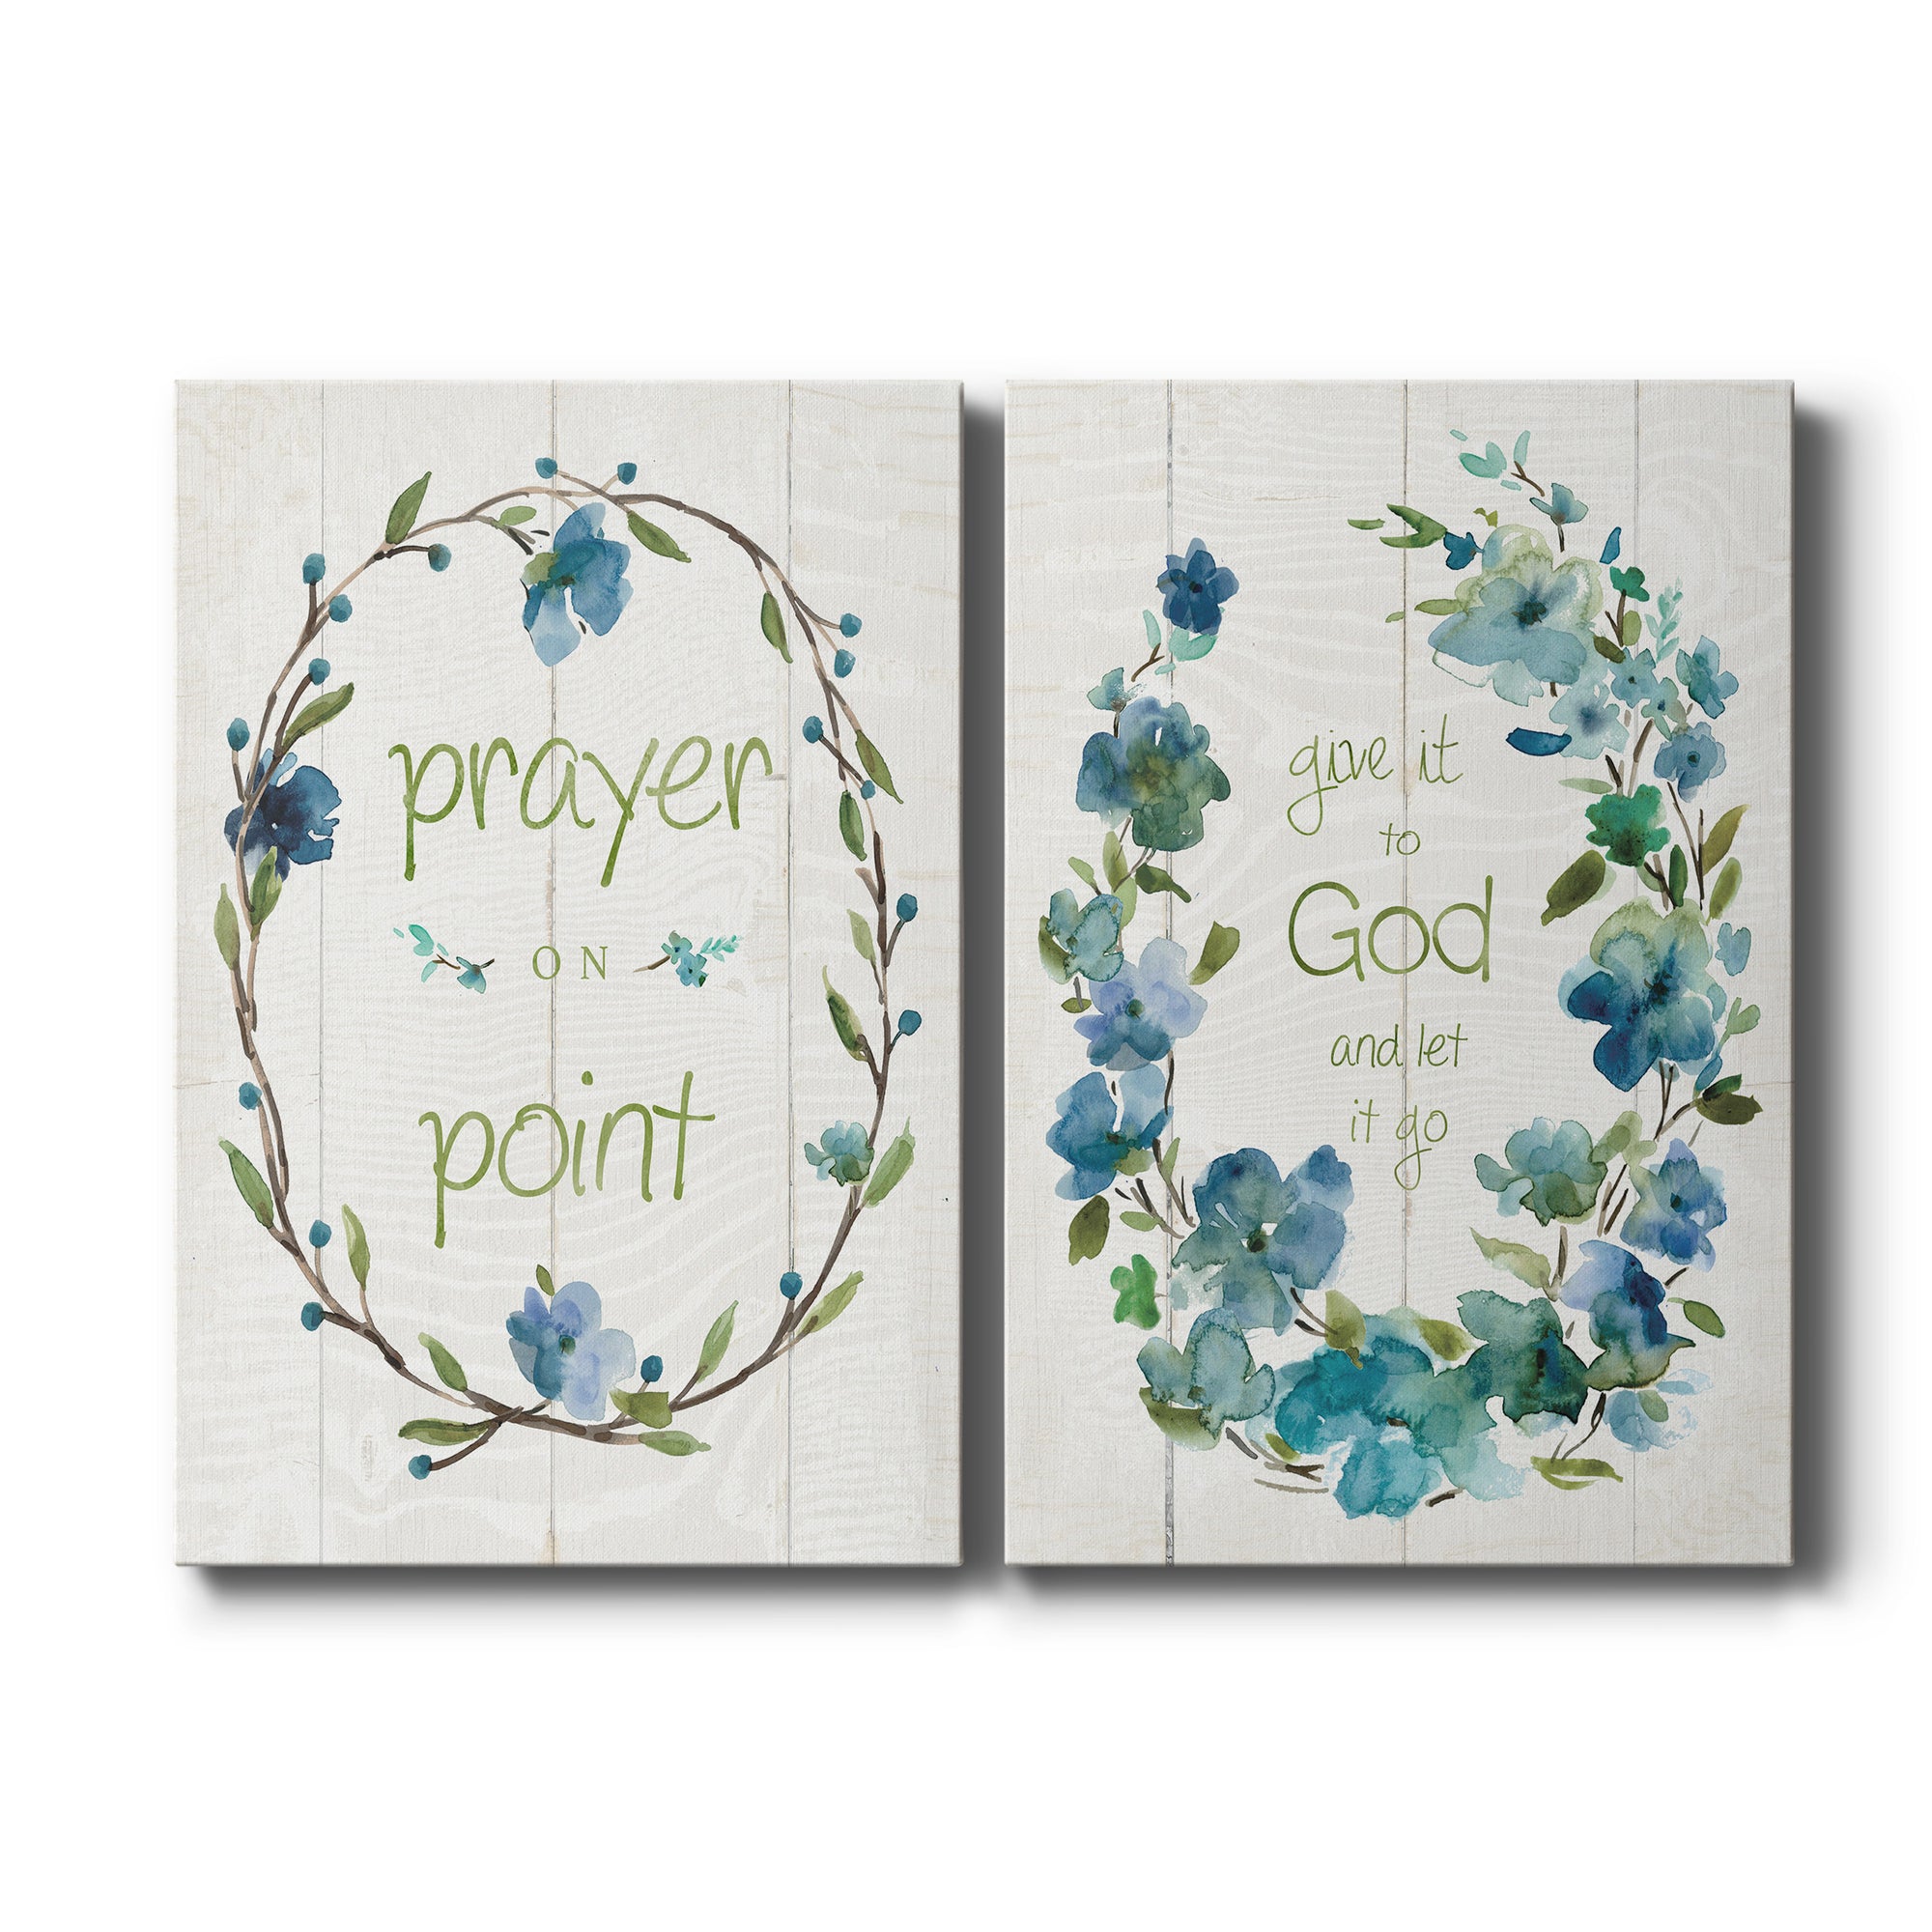 Prayer On Point Premium Gallery Wrapped Canvas - Ready to Hang - Set of 2 - 8 x 12 Each